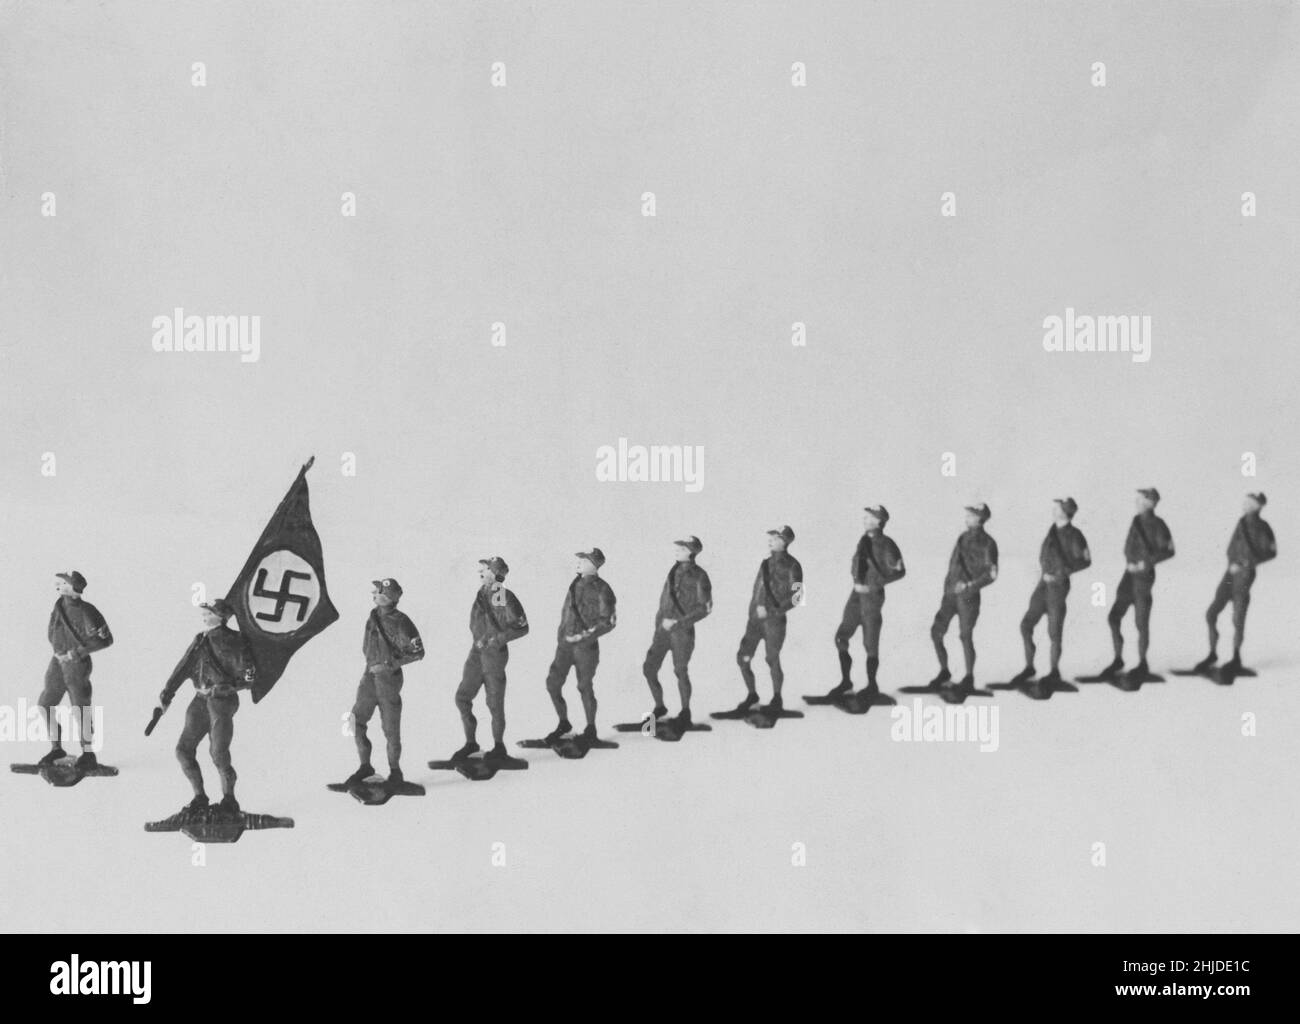 Tin soldiers in the 1930s. German tin toy soldiers wearing uniforms and carrying the nazi flag. Stock Photo